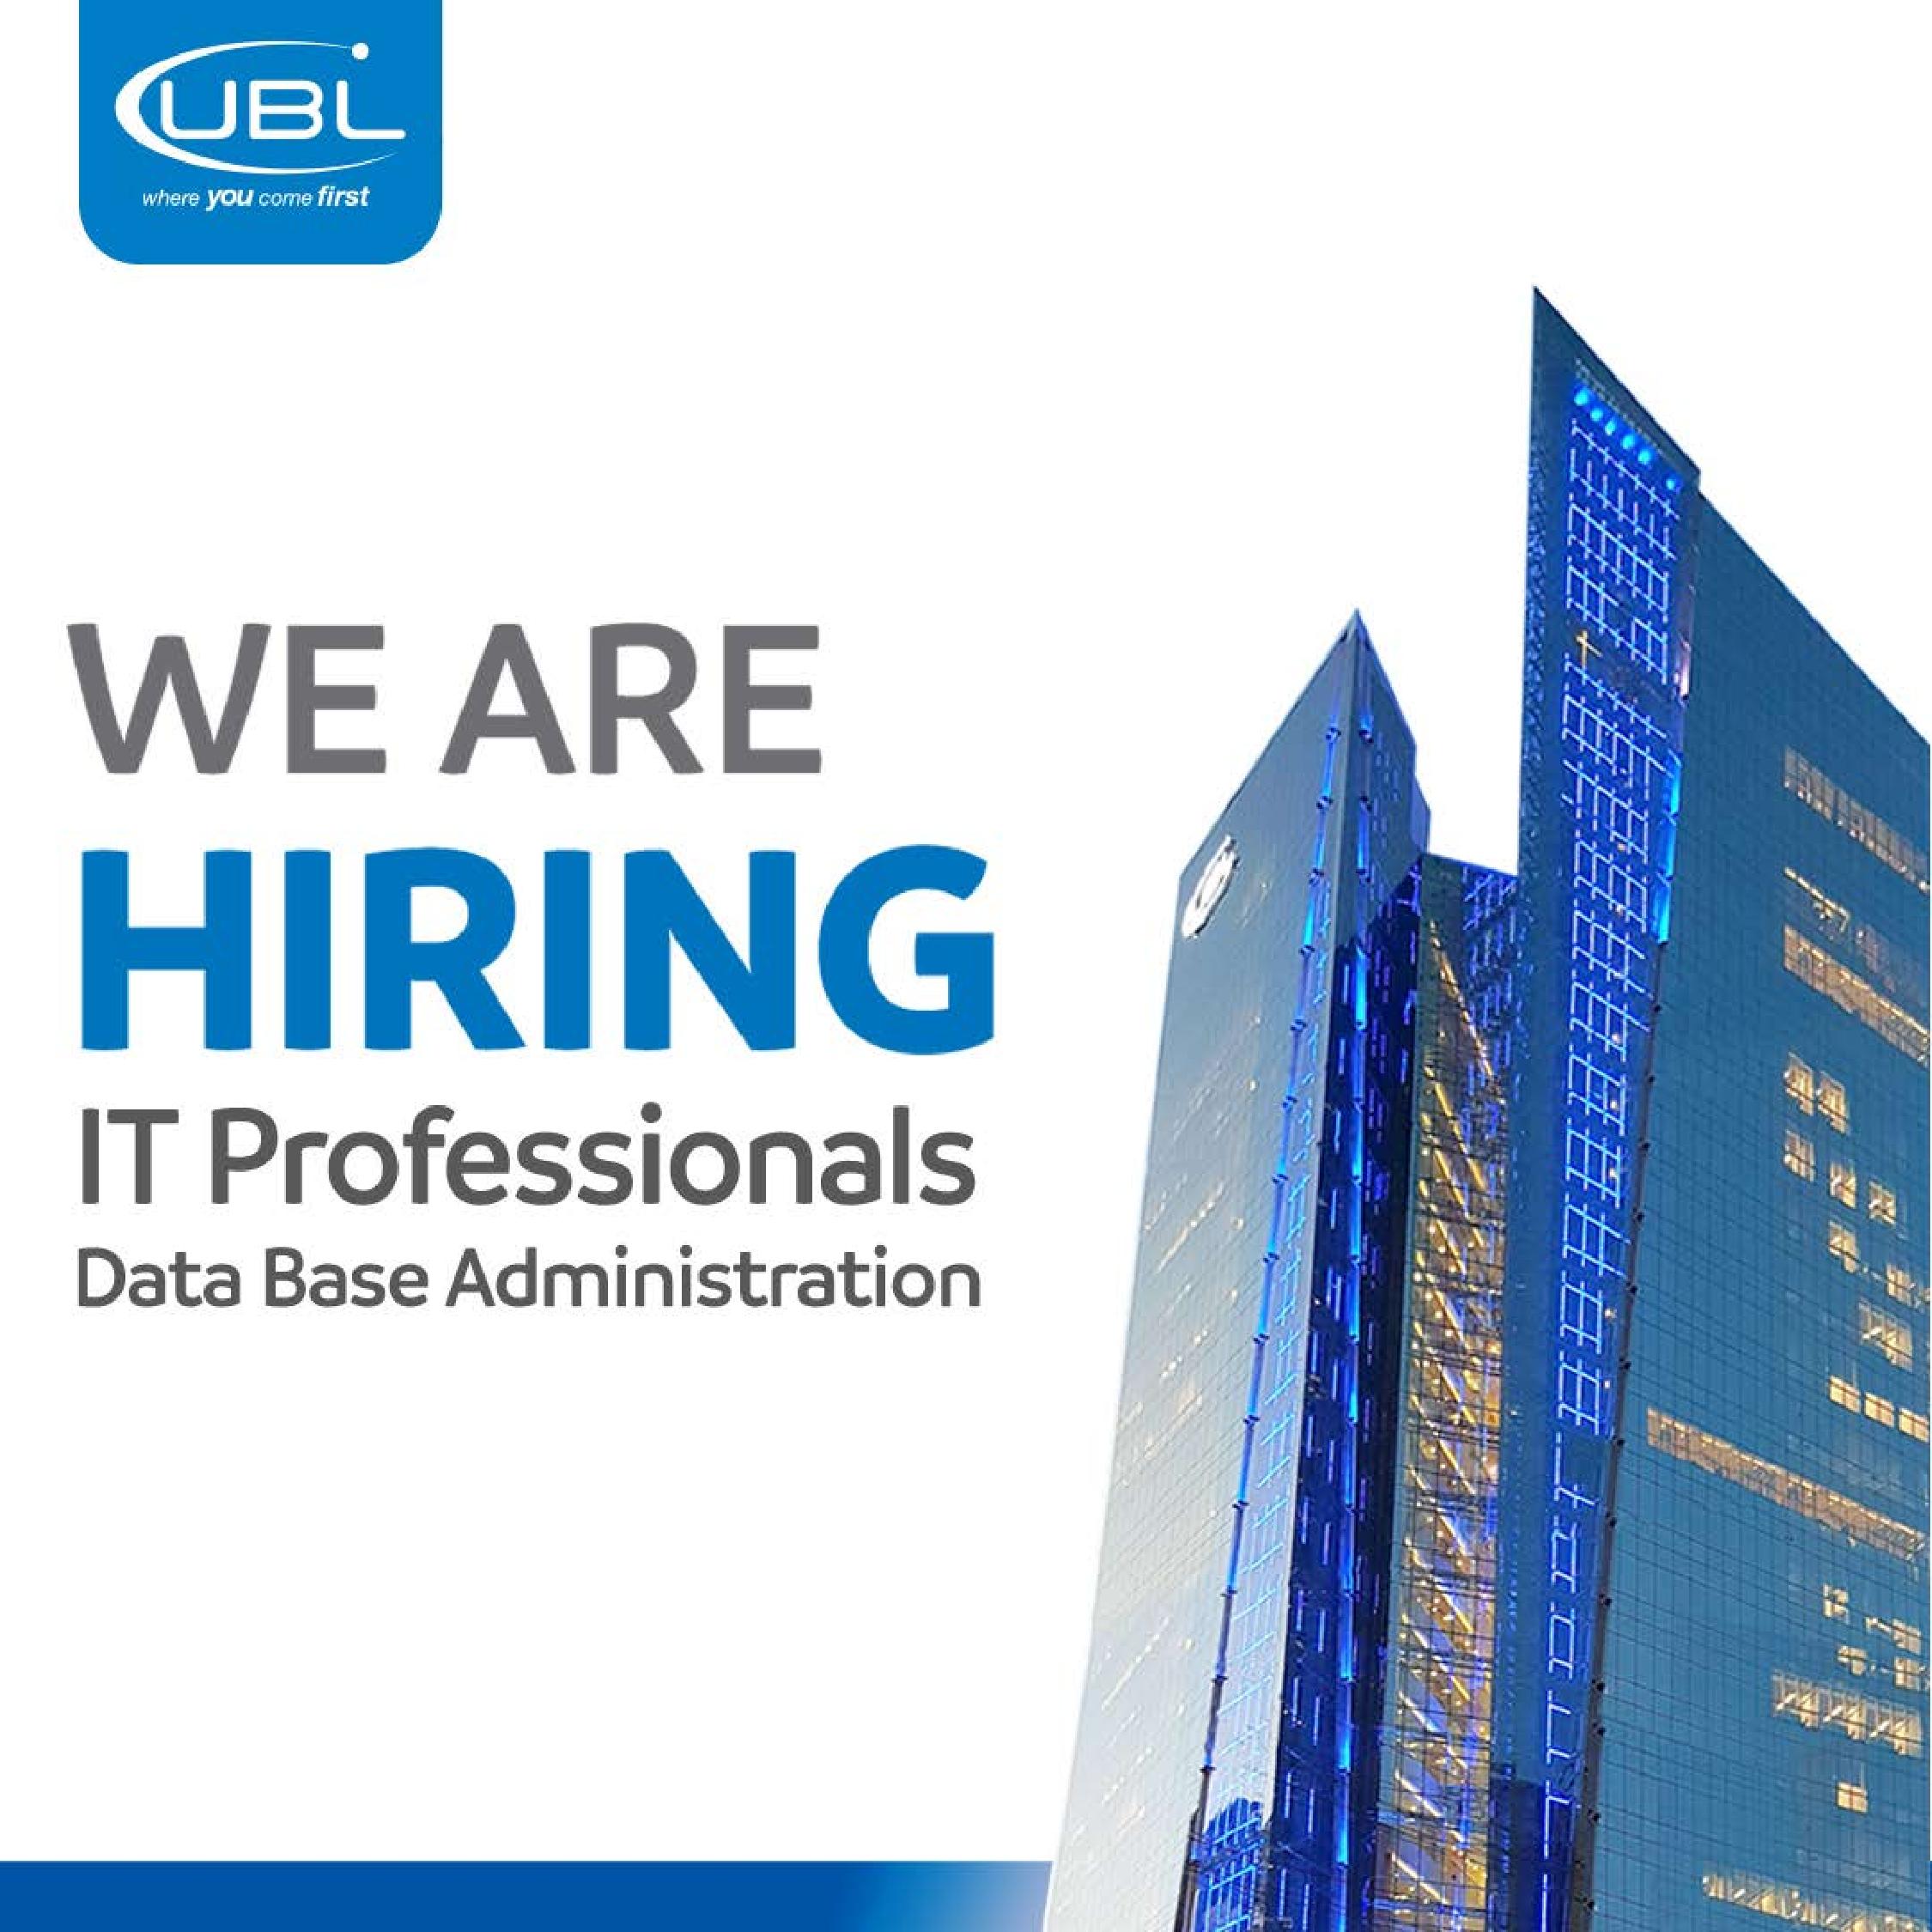 United Bank Limited (UBL) is hiring Technology Professionals